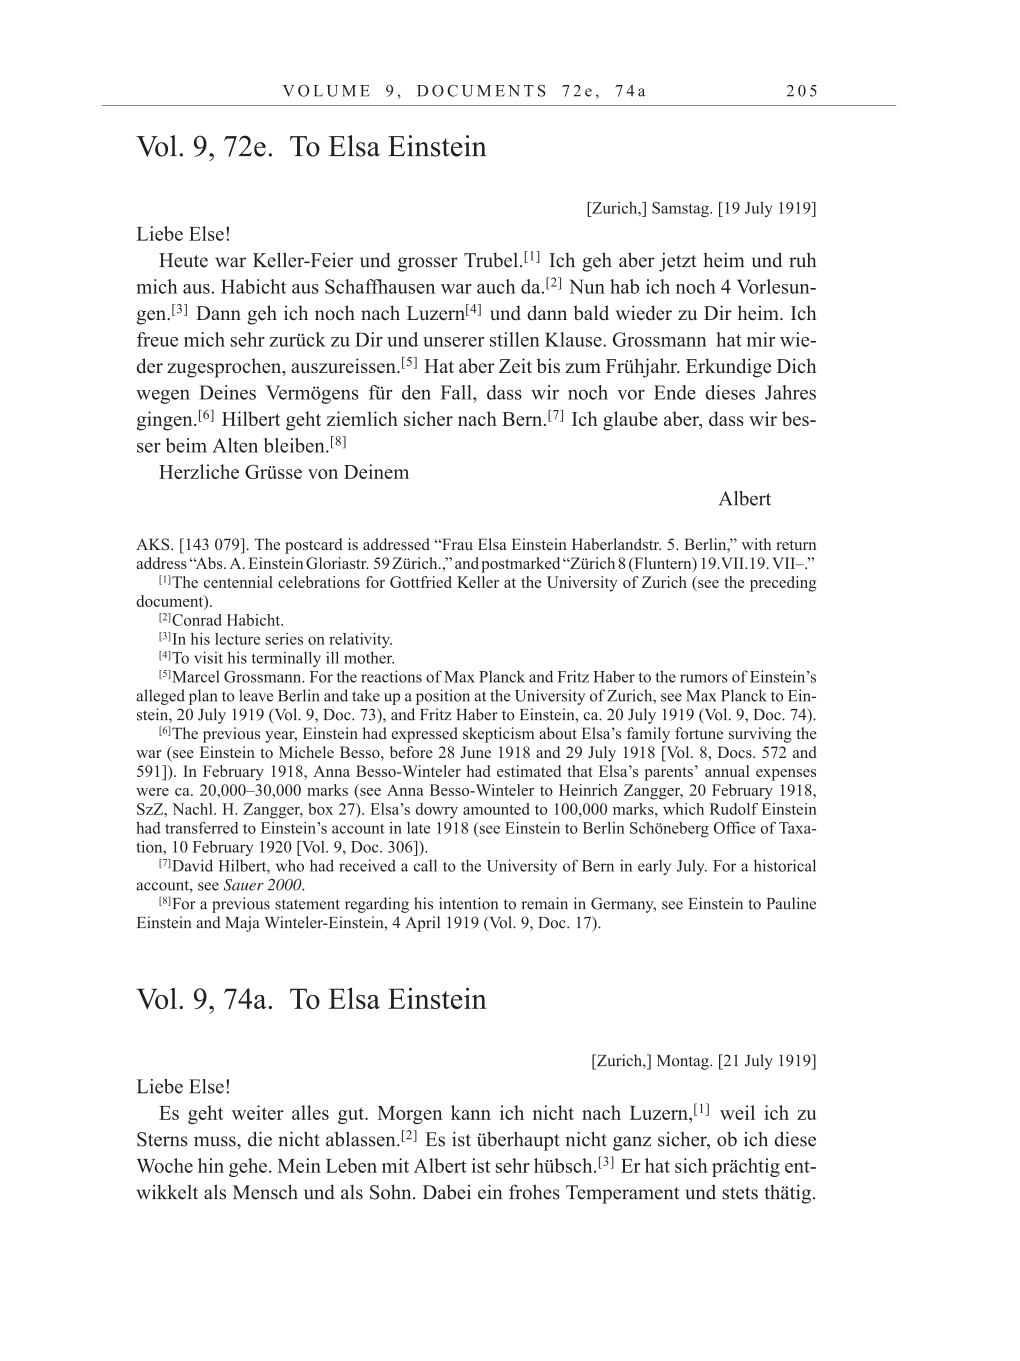 Volume 10: The Berlin Years: Correspondence May-December 1920 / Supplementary Correspondence 1909-1920 page 205